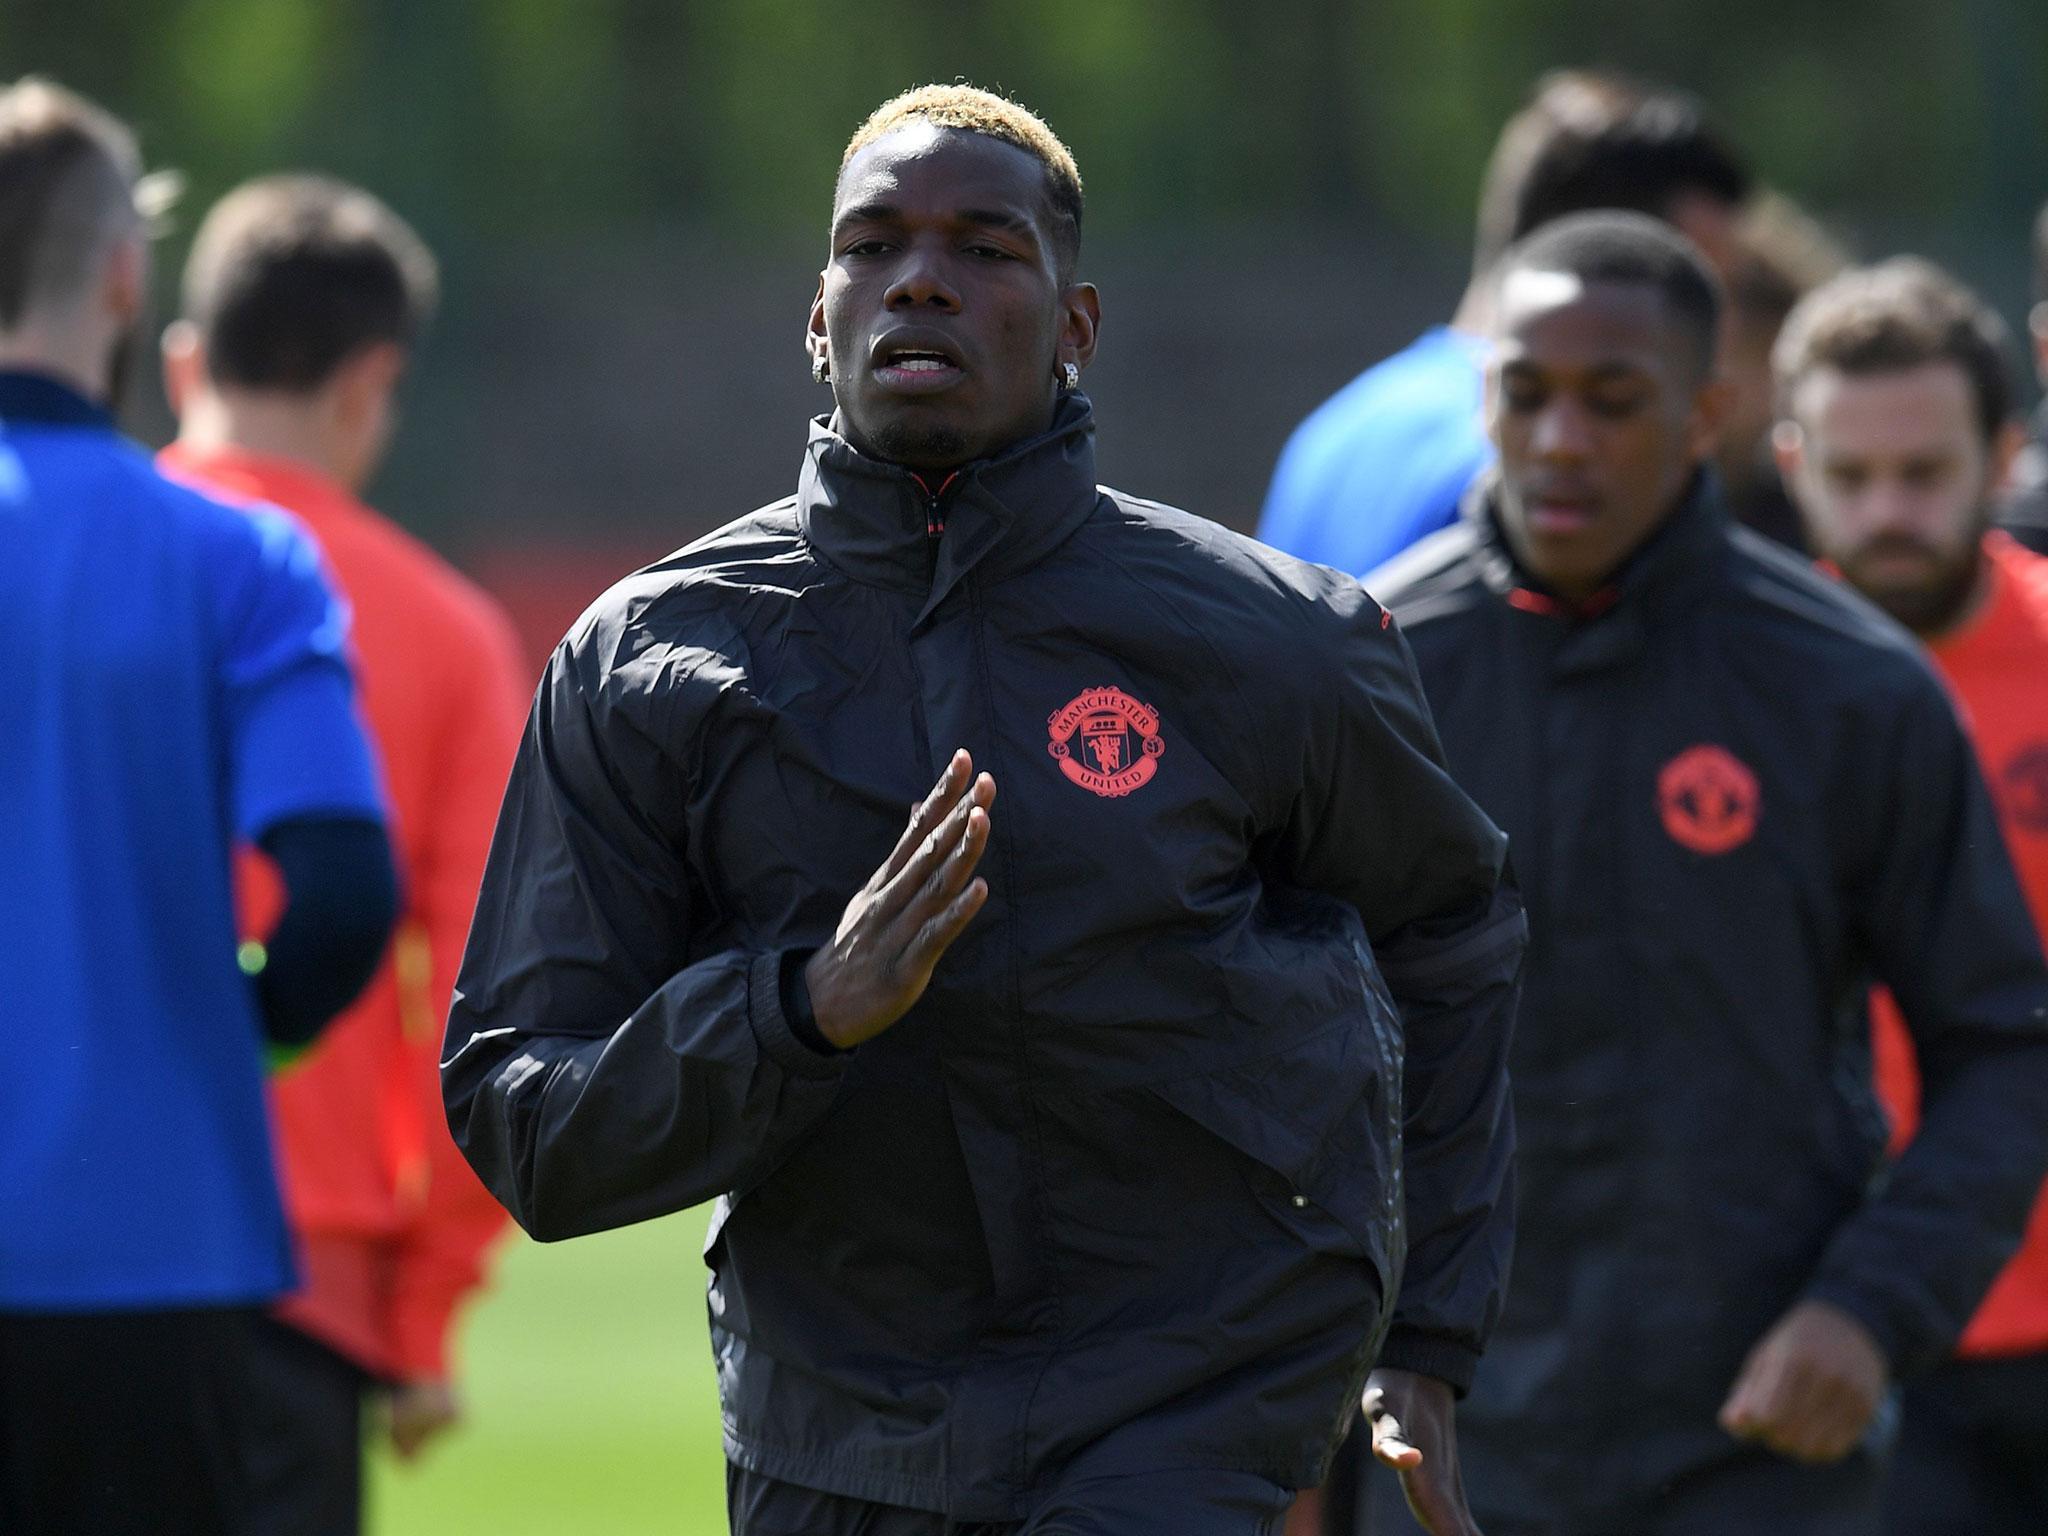 Paul Pogba was among a number of key players to return to training on Wednesday